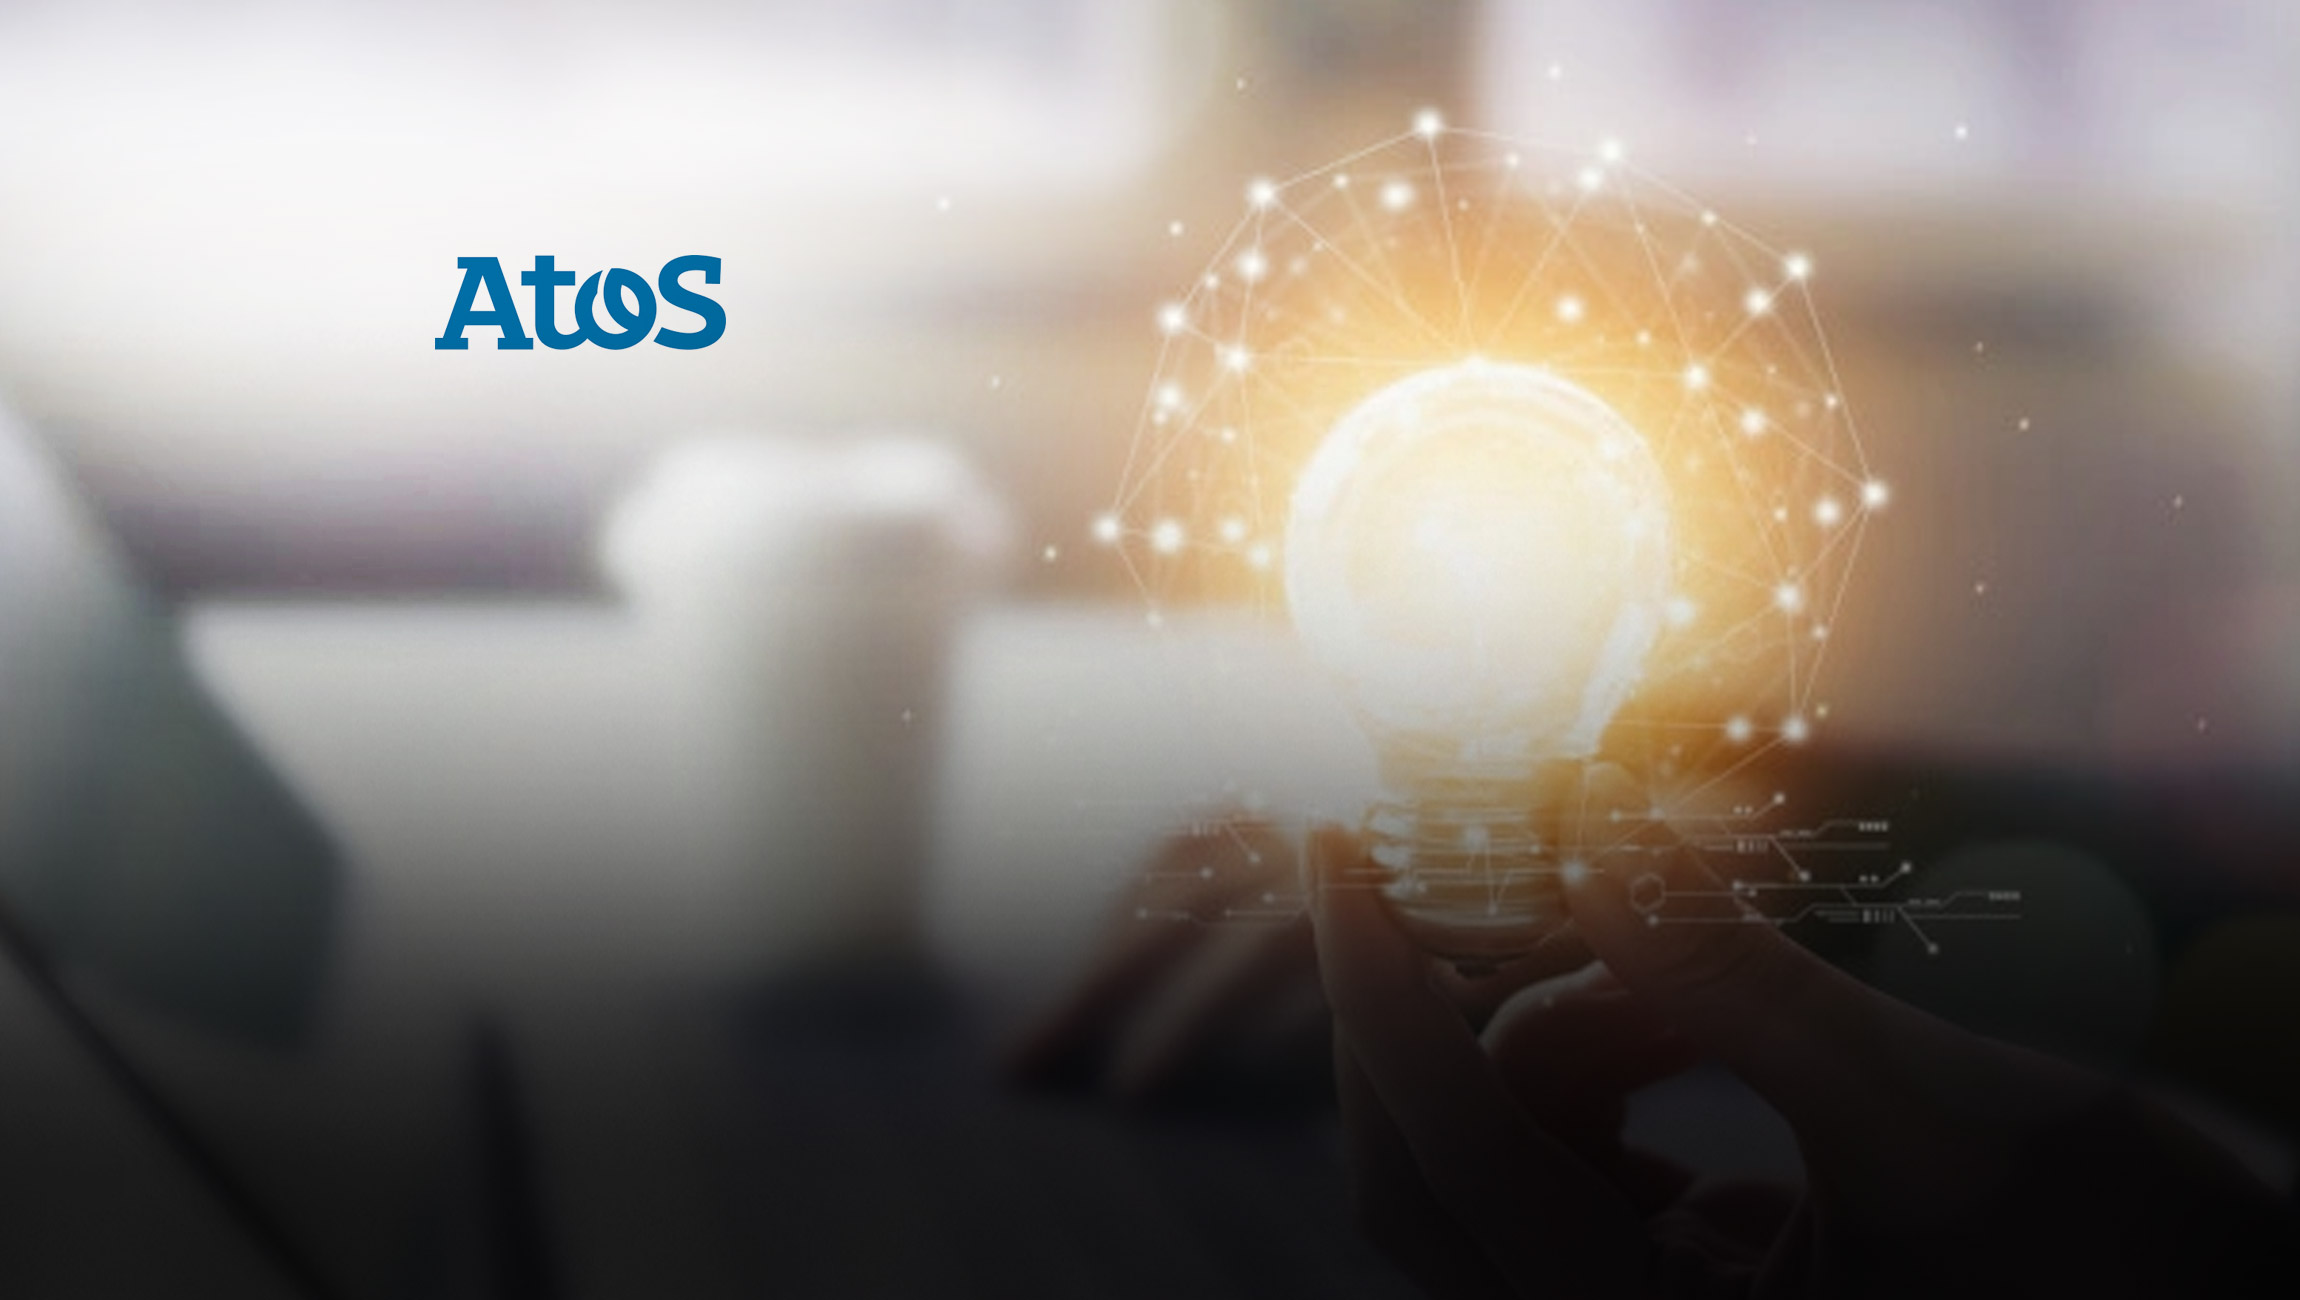 Atos recognized as a 2021 Gartner Peer Insights Customers’ Choice for Data and Analytics Service Providers